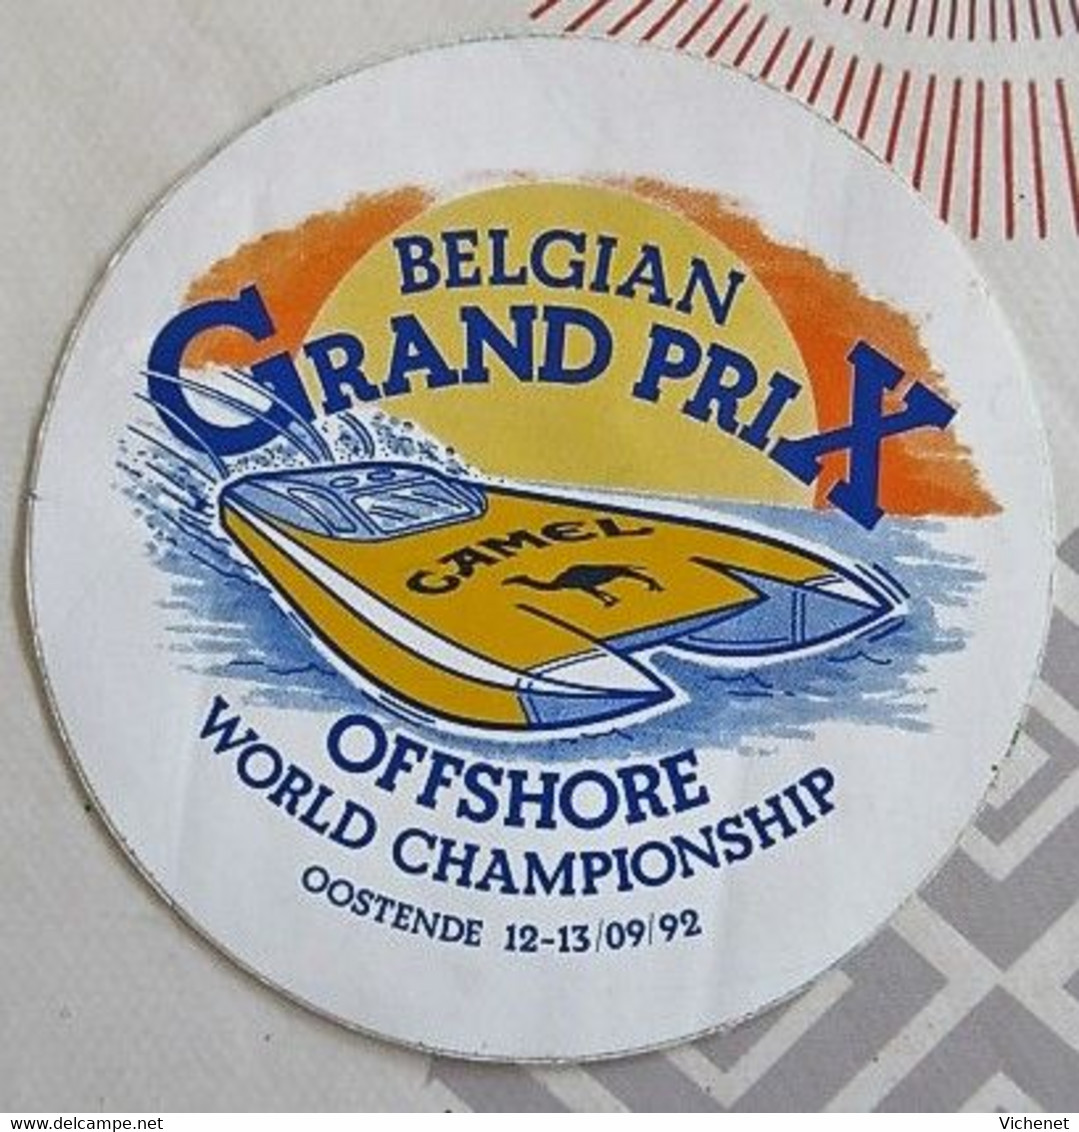 CAMEL - Belgium Grand Prix - Offshore World Championship - Oostende 12-13 / 09 / 92 - Advertising Items